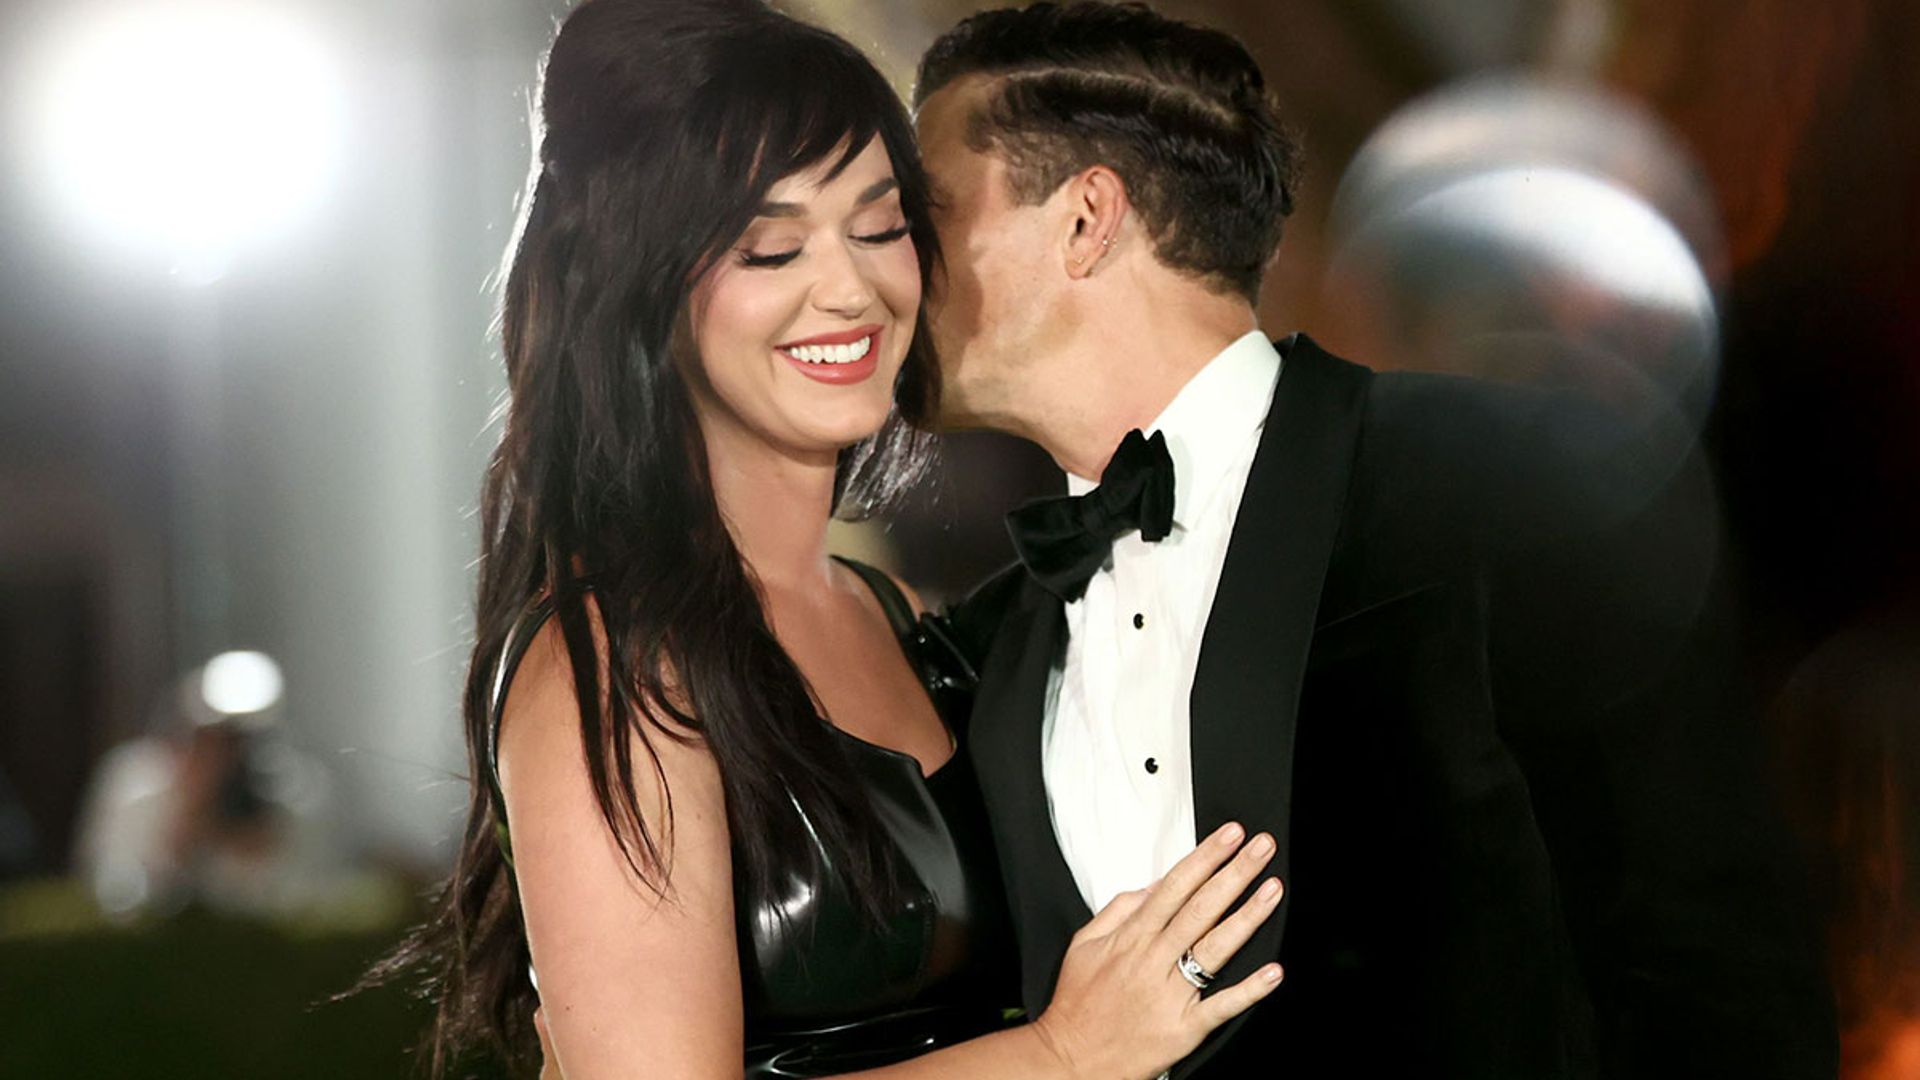 Katy Perry shows off dramatic hair transformation for loved-up night out with Orlando Bloom 